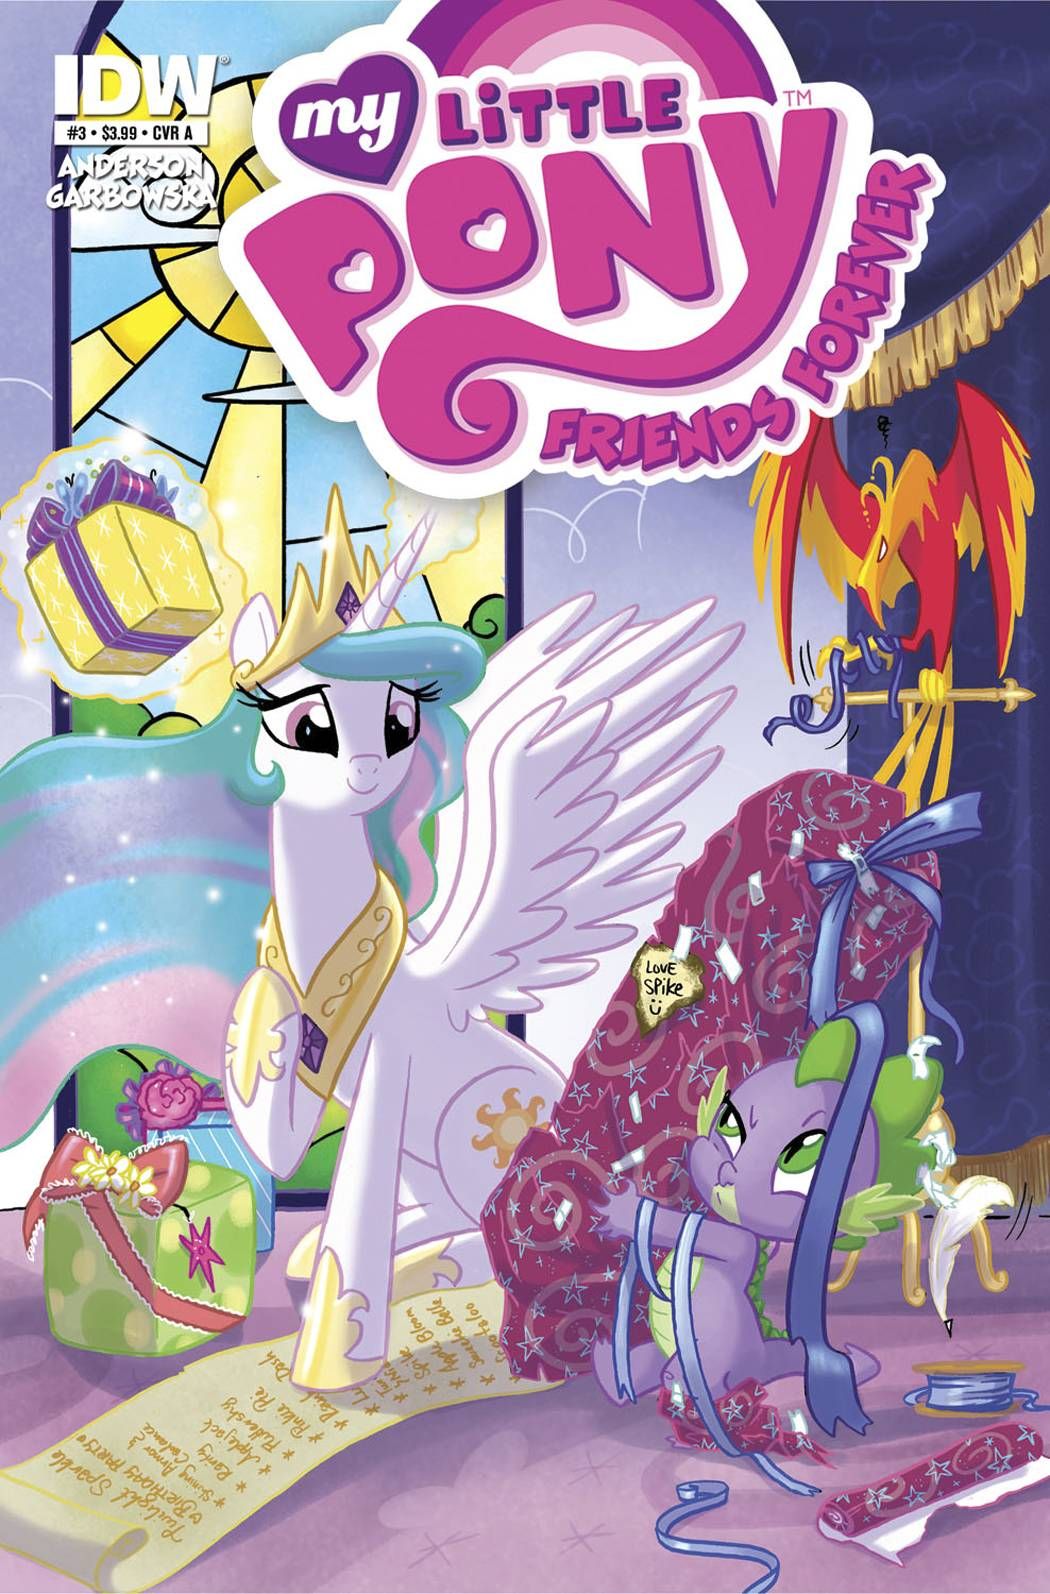 My Little Pony Friends Forever #3 Comic